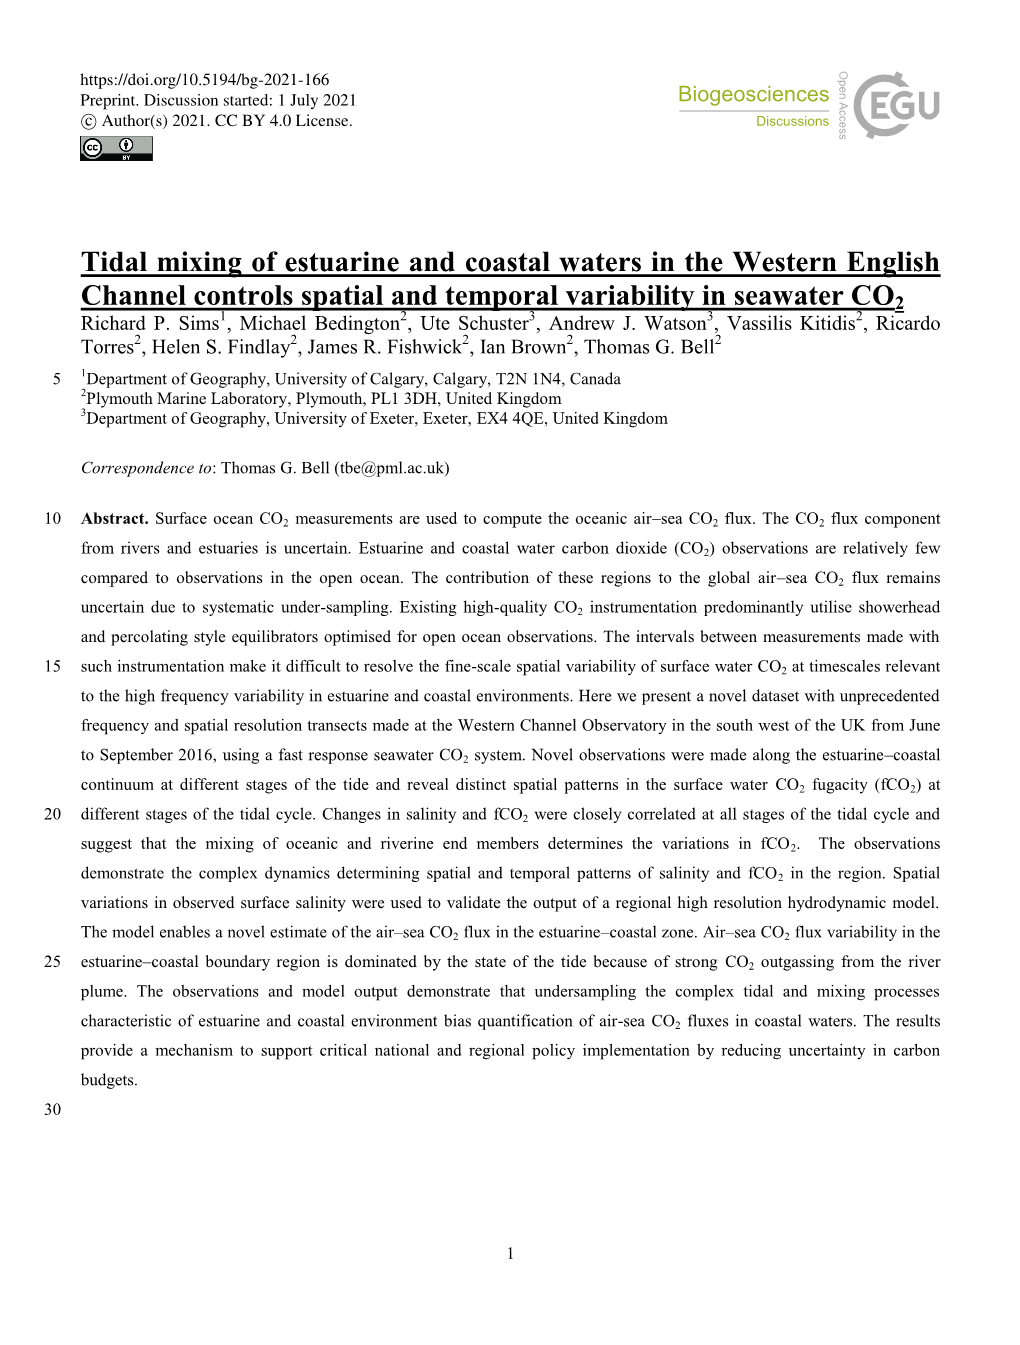 Tidal Mixing of Estuarine and Coastal Waters in the Western English Channel Controls Spatial and Temporal Variability in Seawater CO2 Richard P